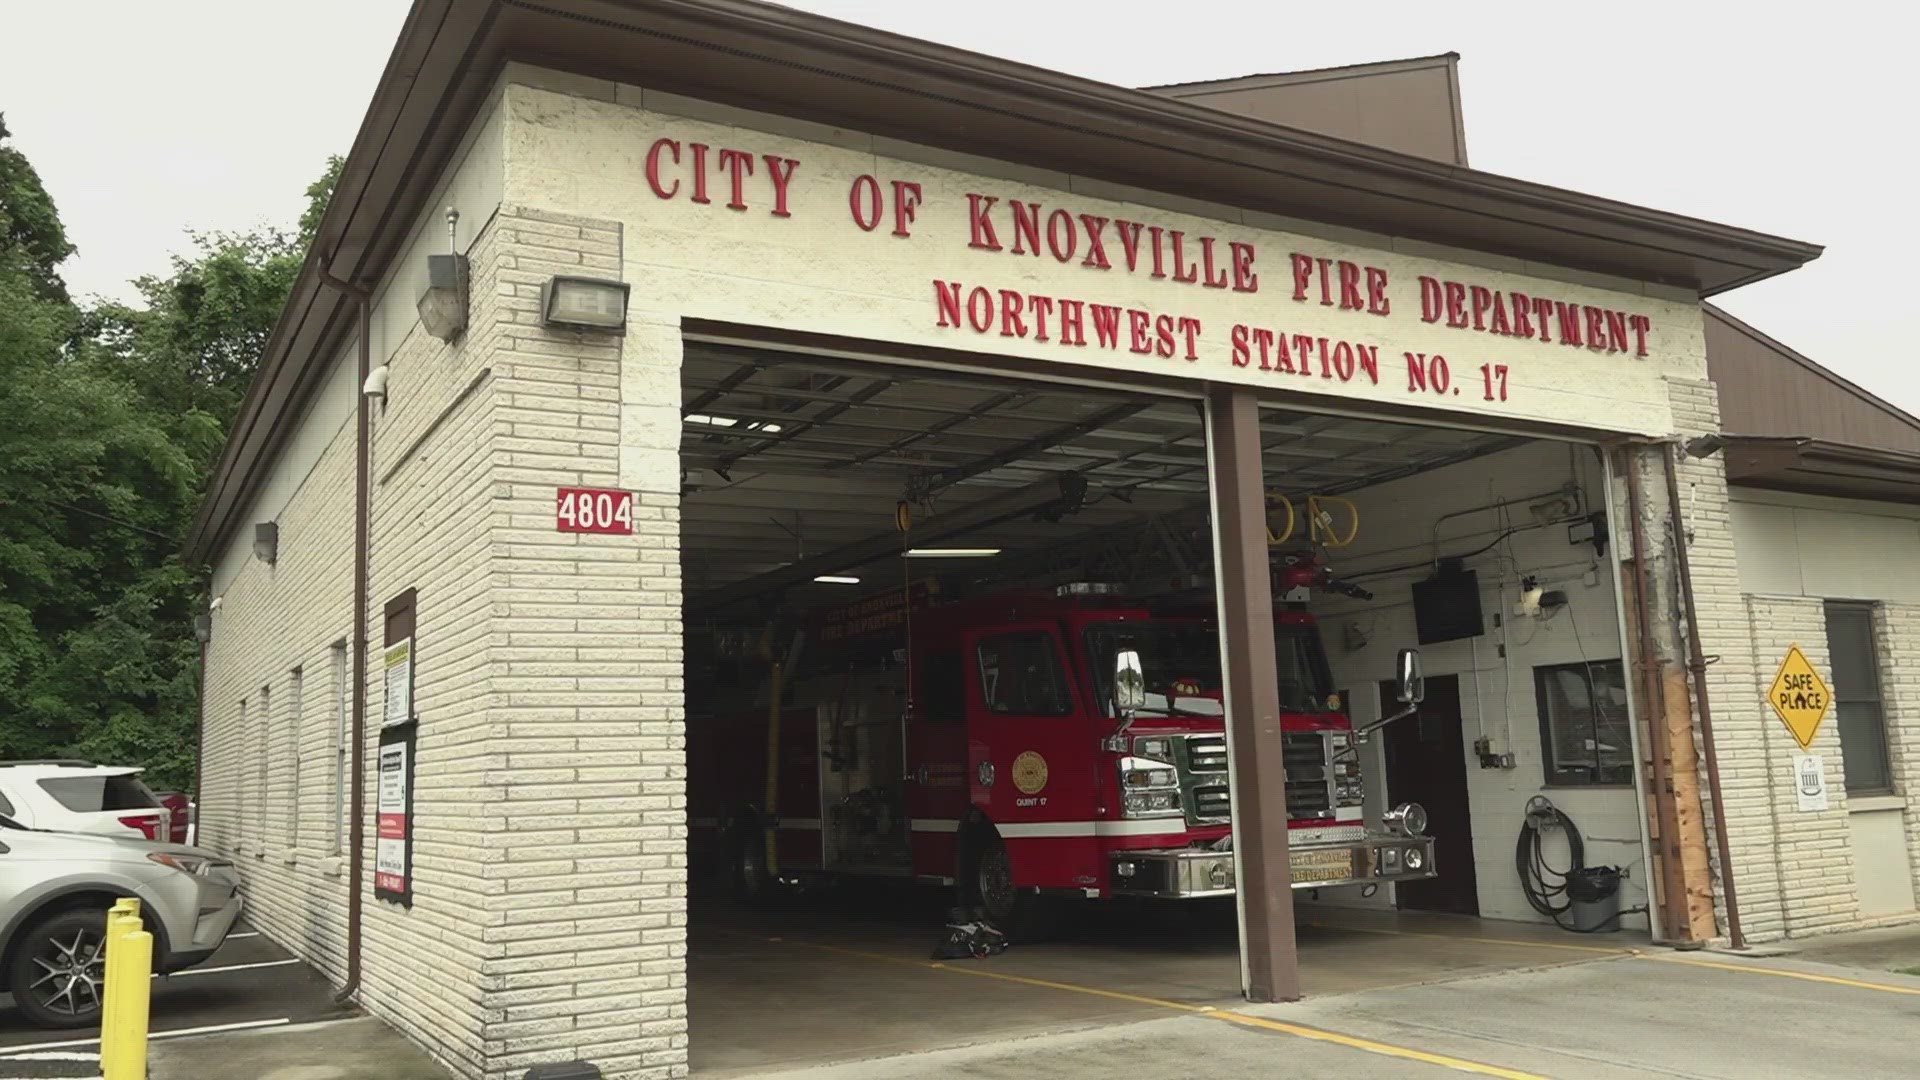 Knoxville Mayor in Indya Kincannon visited Fire Station 19 where 
someone surrendered a newborn baby inside a Safe Haven Baby Box.